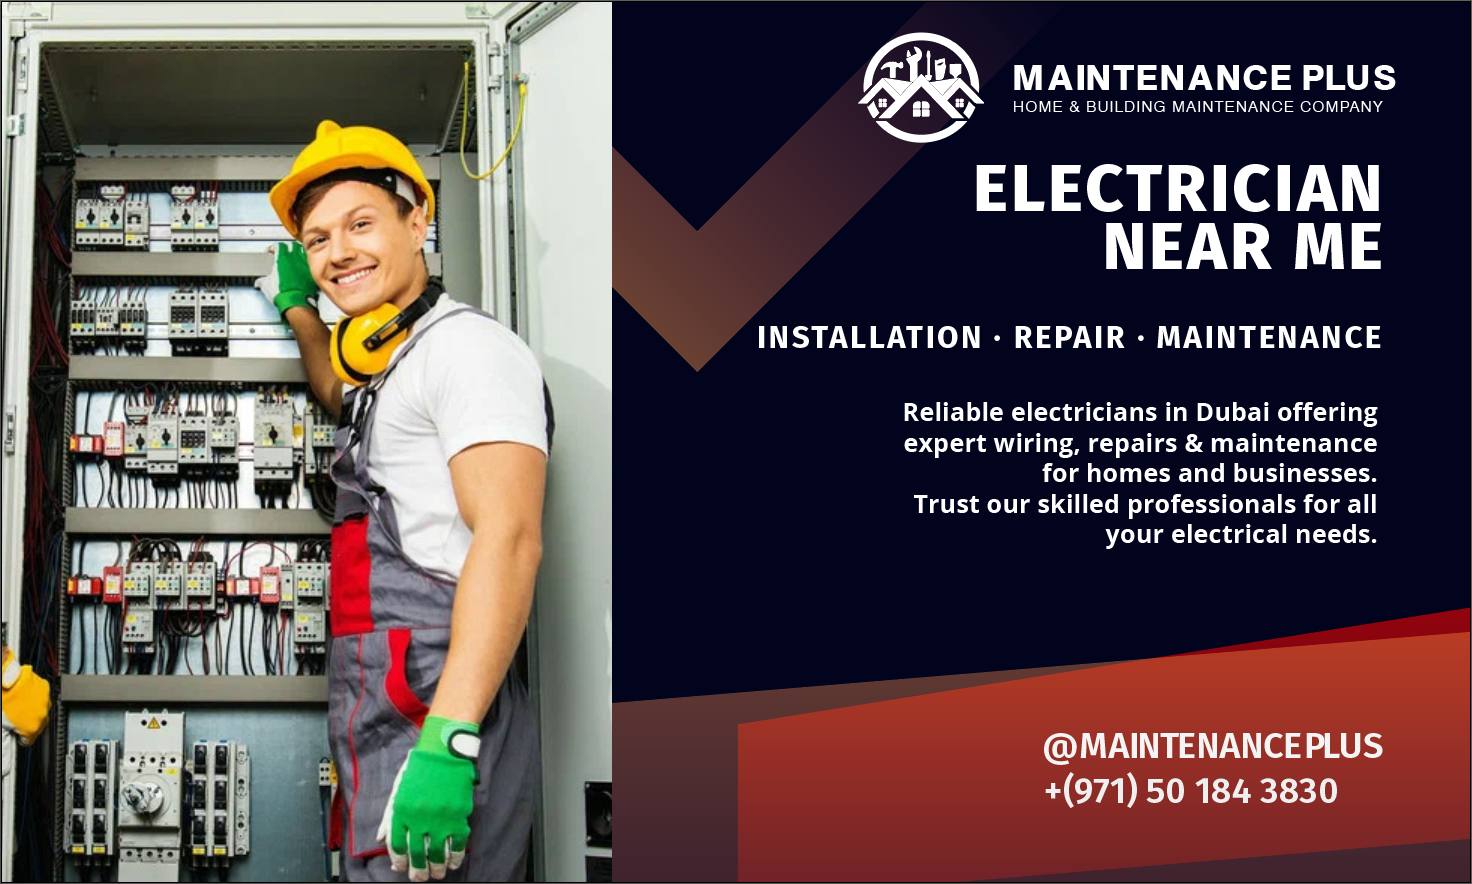 Why Should You Trust Maintenance Plus for Electrician?